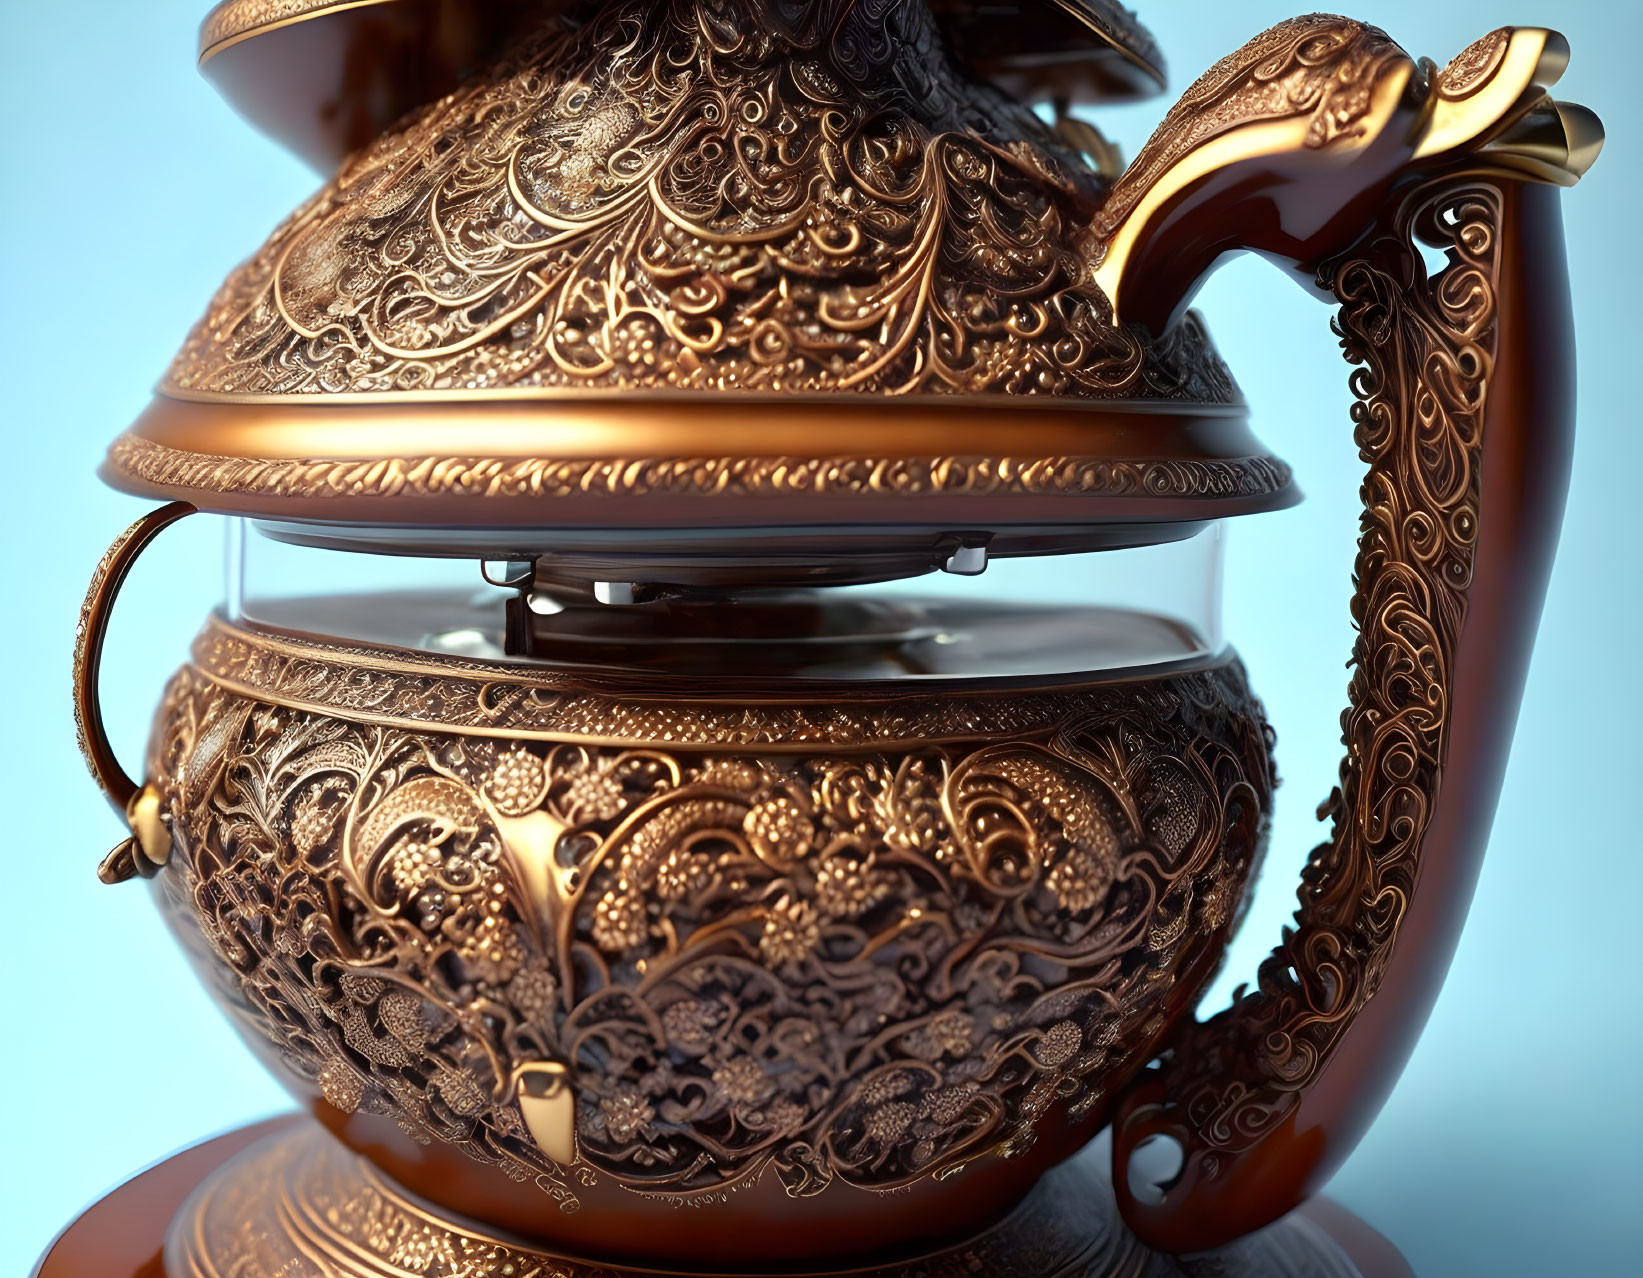 Intricately embossed metallic teapot on soft blue background